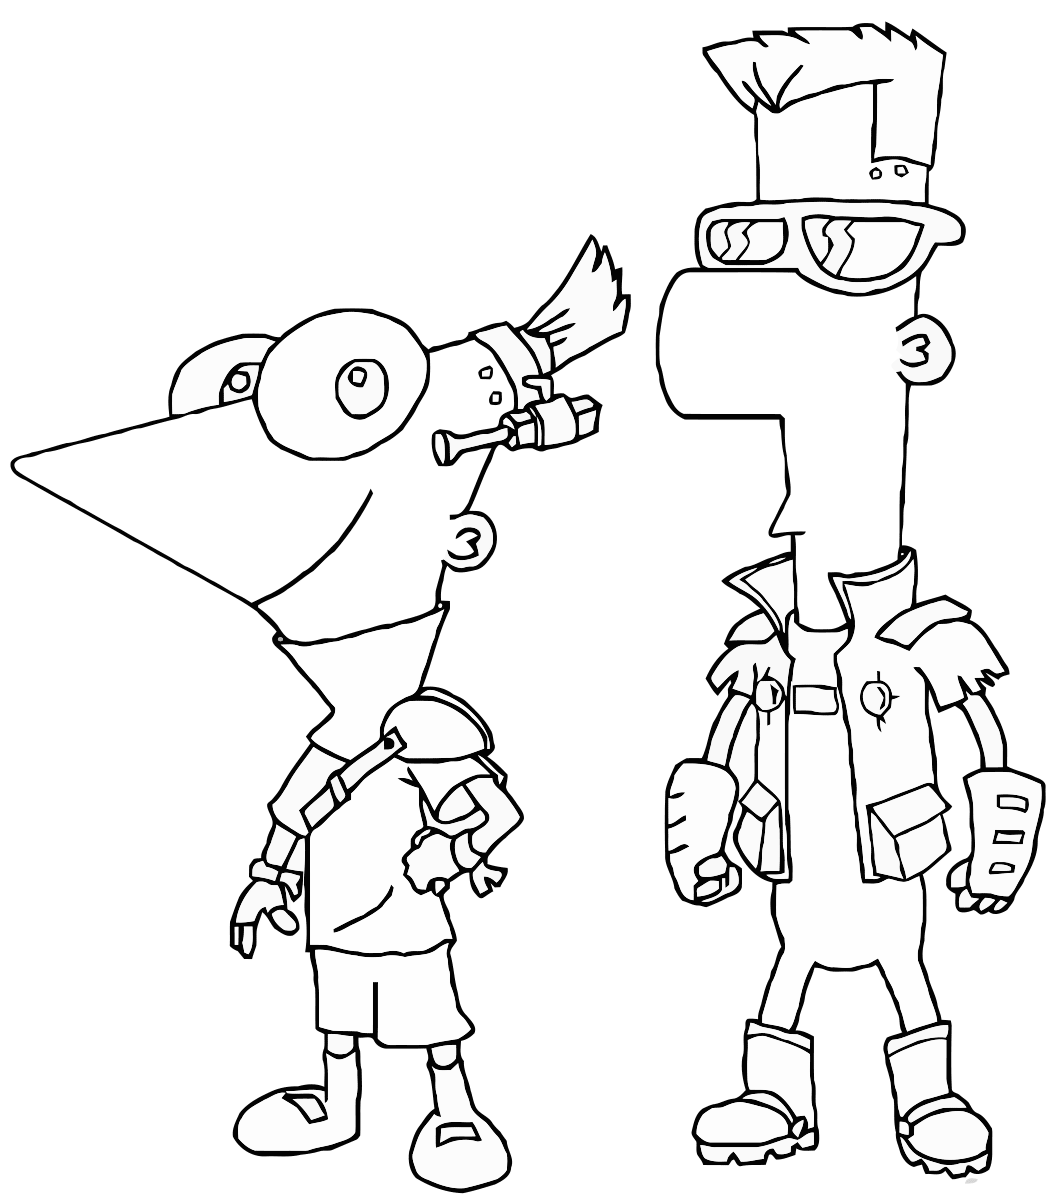 phineas-and-ferb-coloring-pages-to-download-and-print-for-free